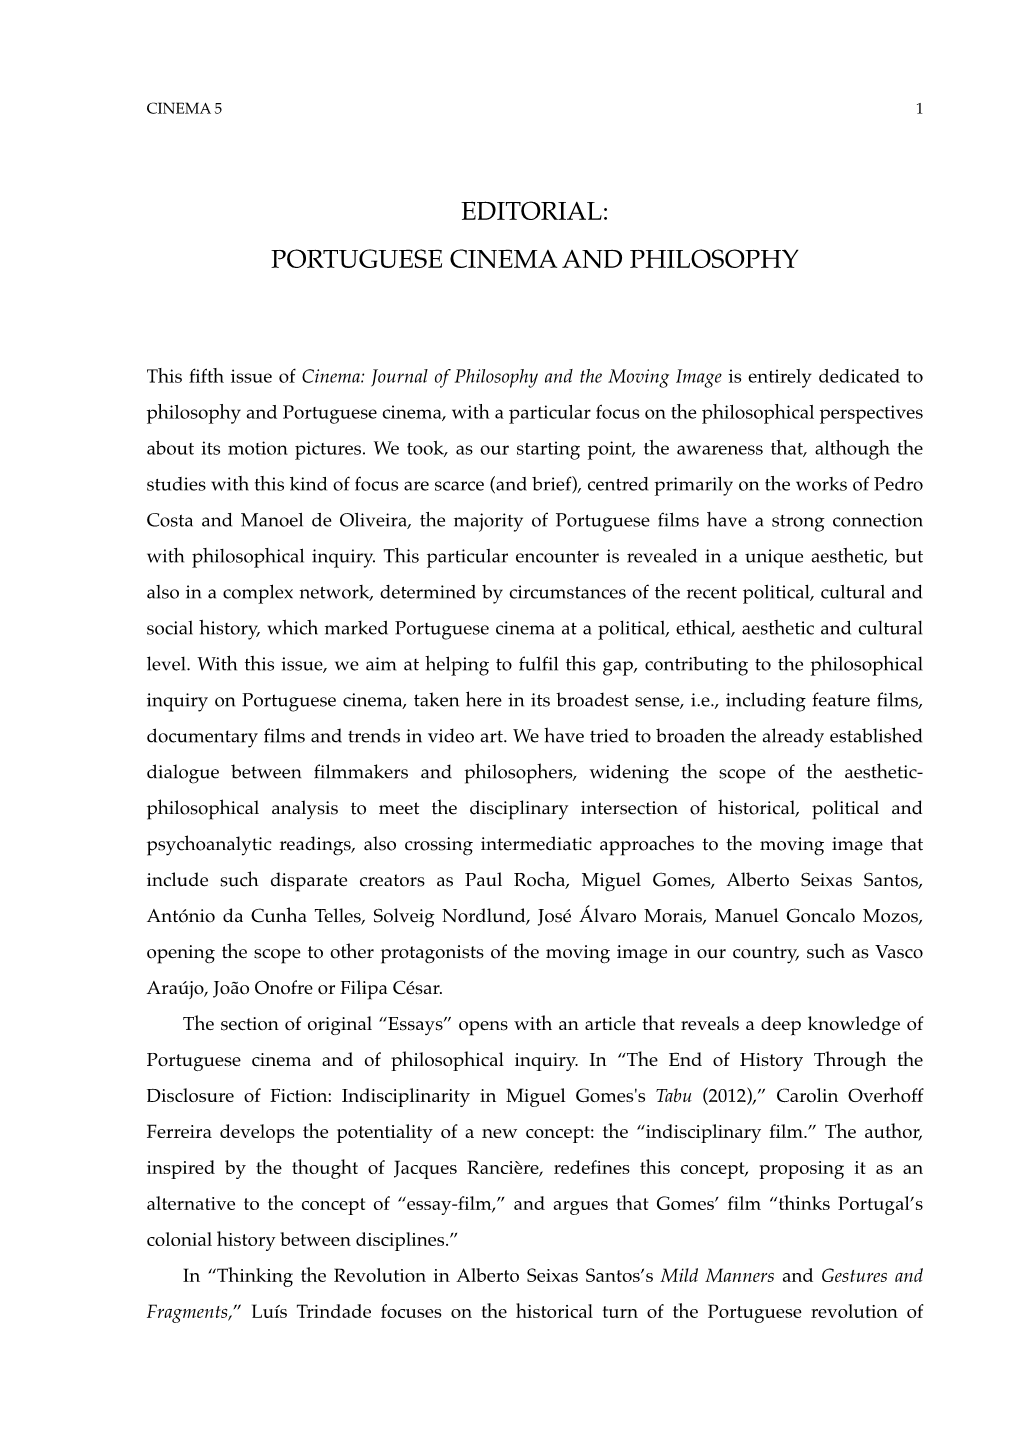 Editorial: Portuguese Cinema and Philosophy